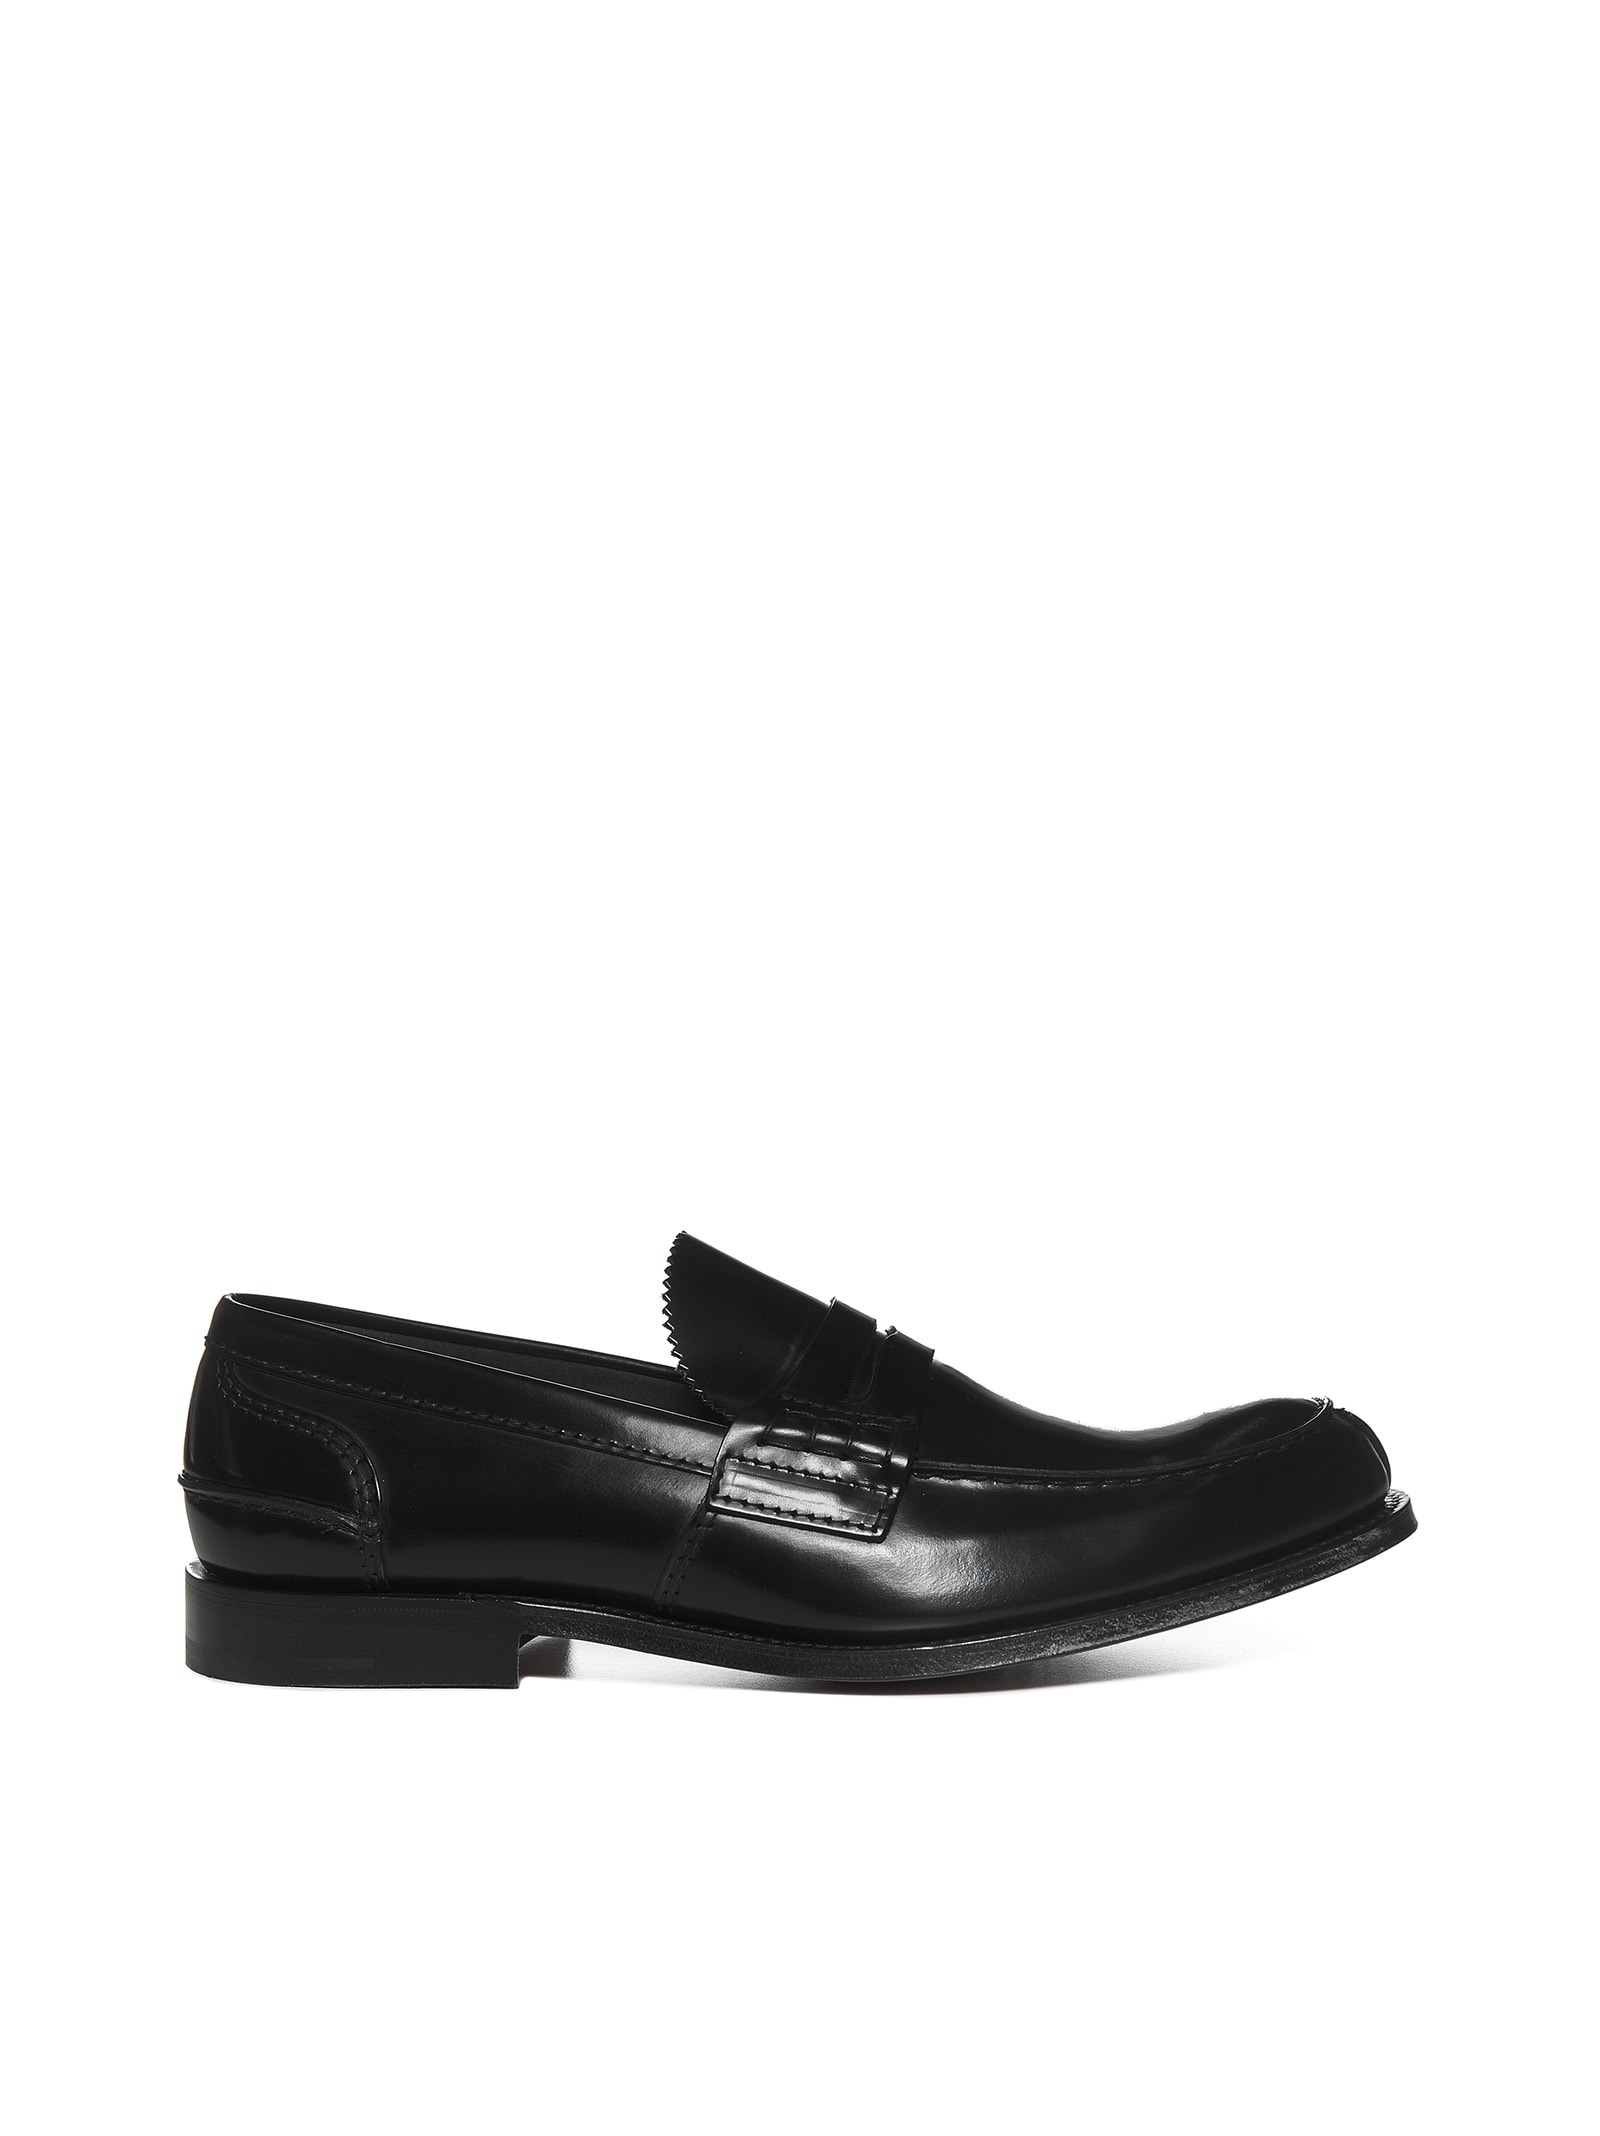 CHURCH'S LOAFERS